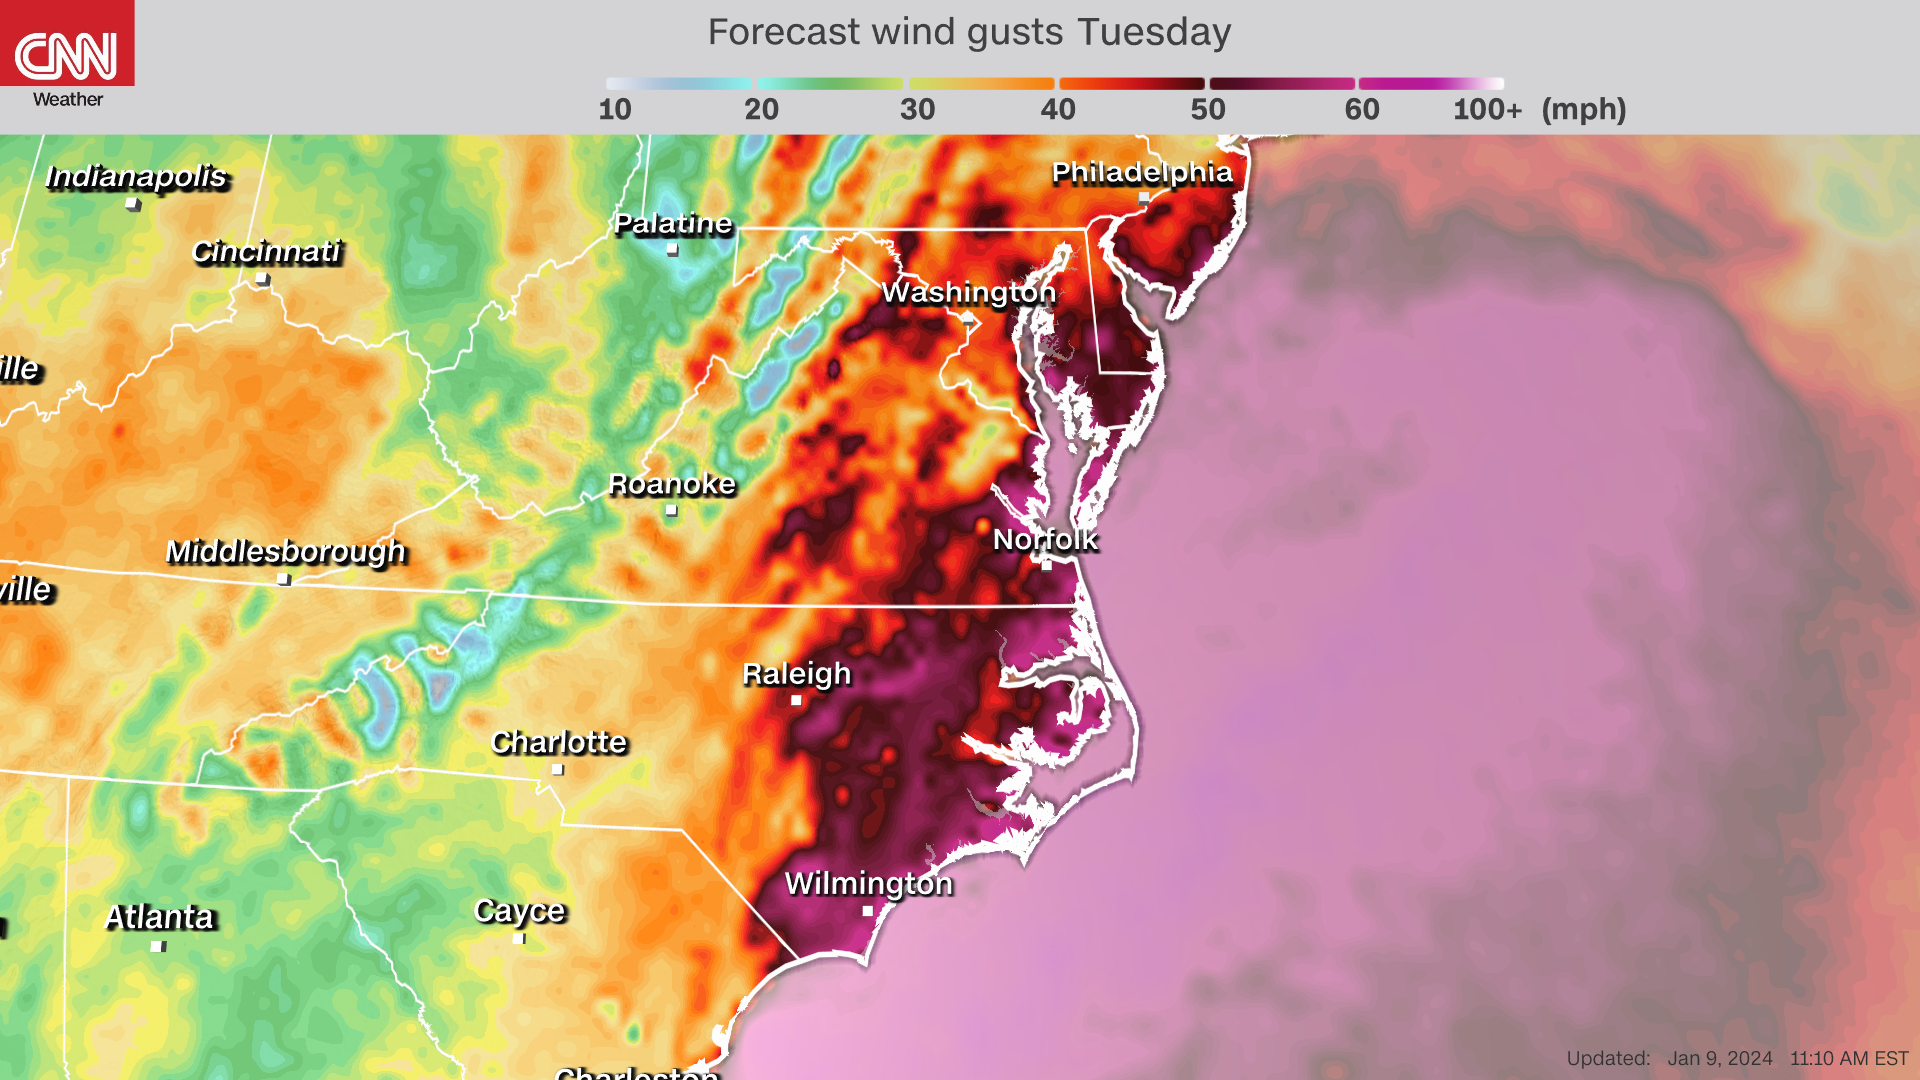 Wind gust forecast for Tuesday evening.